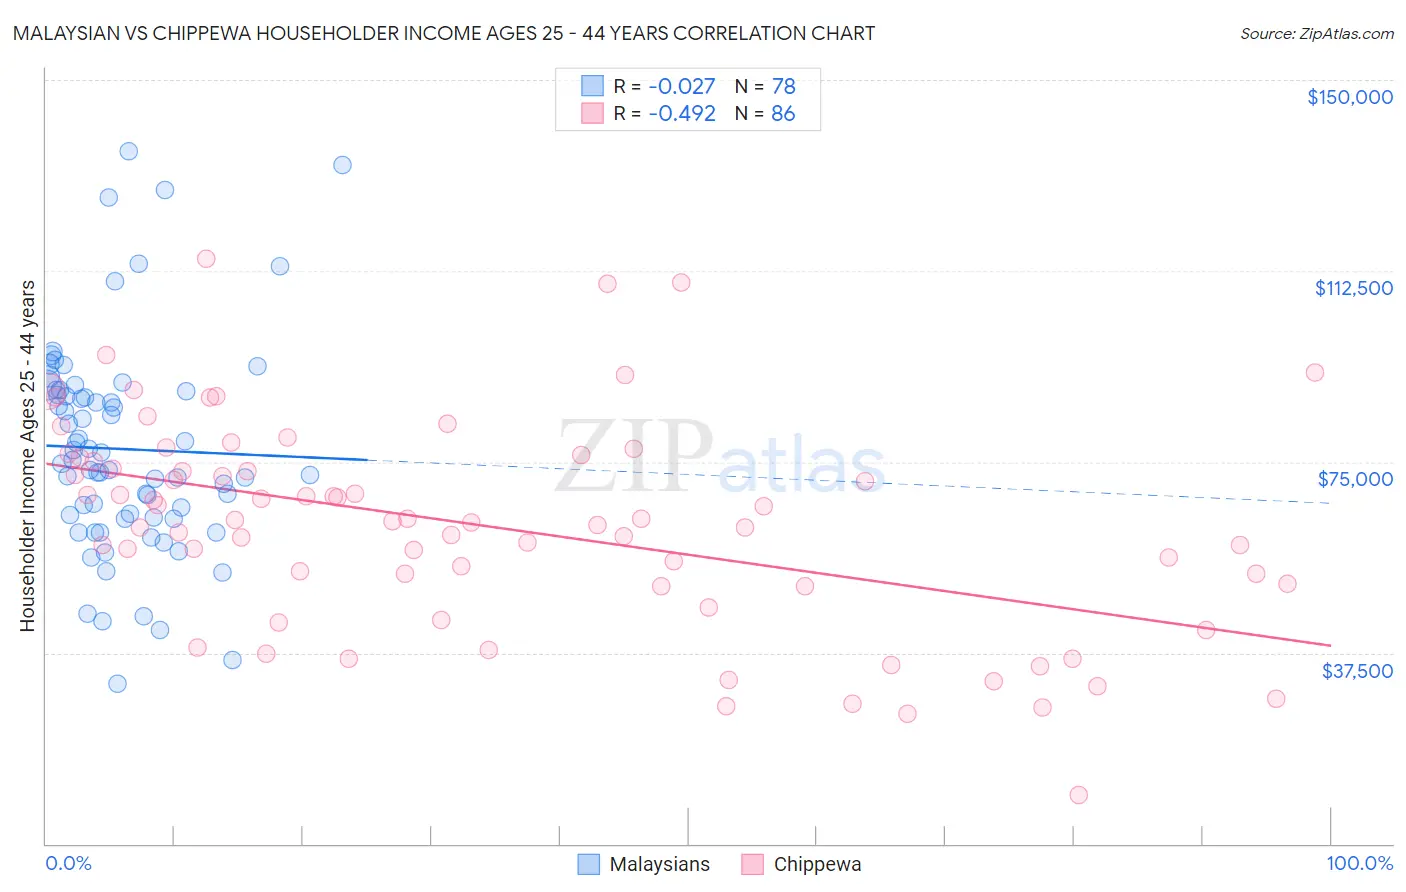 Malaysian vs Chippewa Householder Income Ages 25 - 44 years